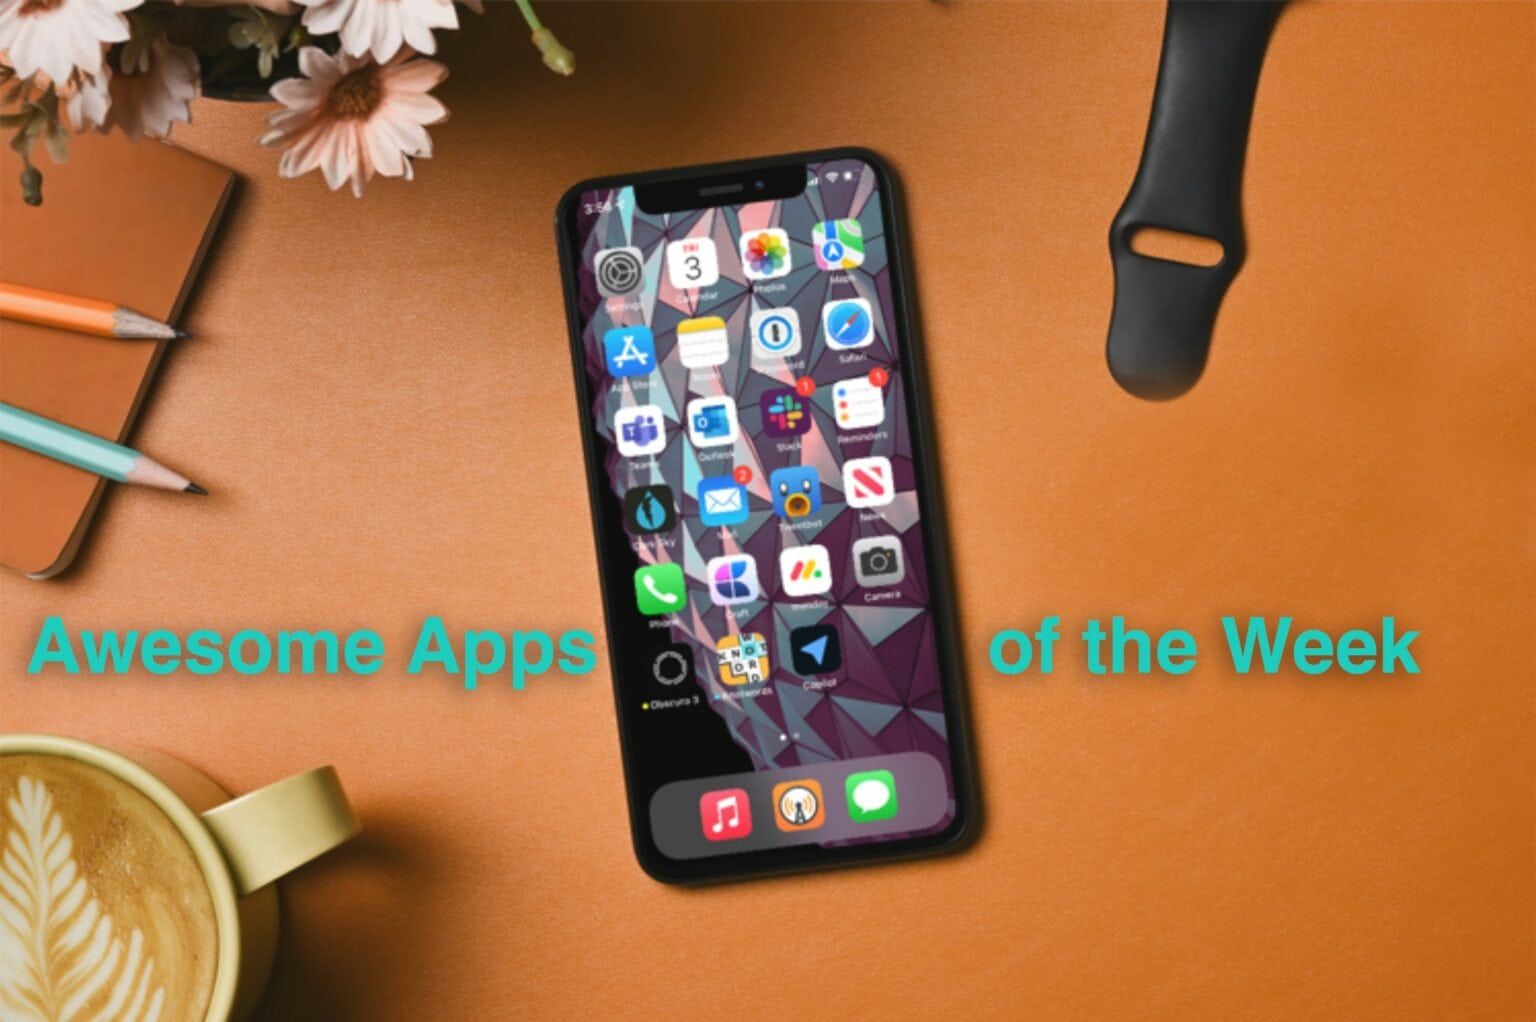 Awesome Apps of the Week with iPhone in middle of desk